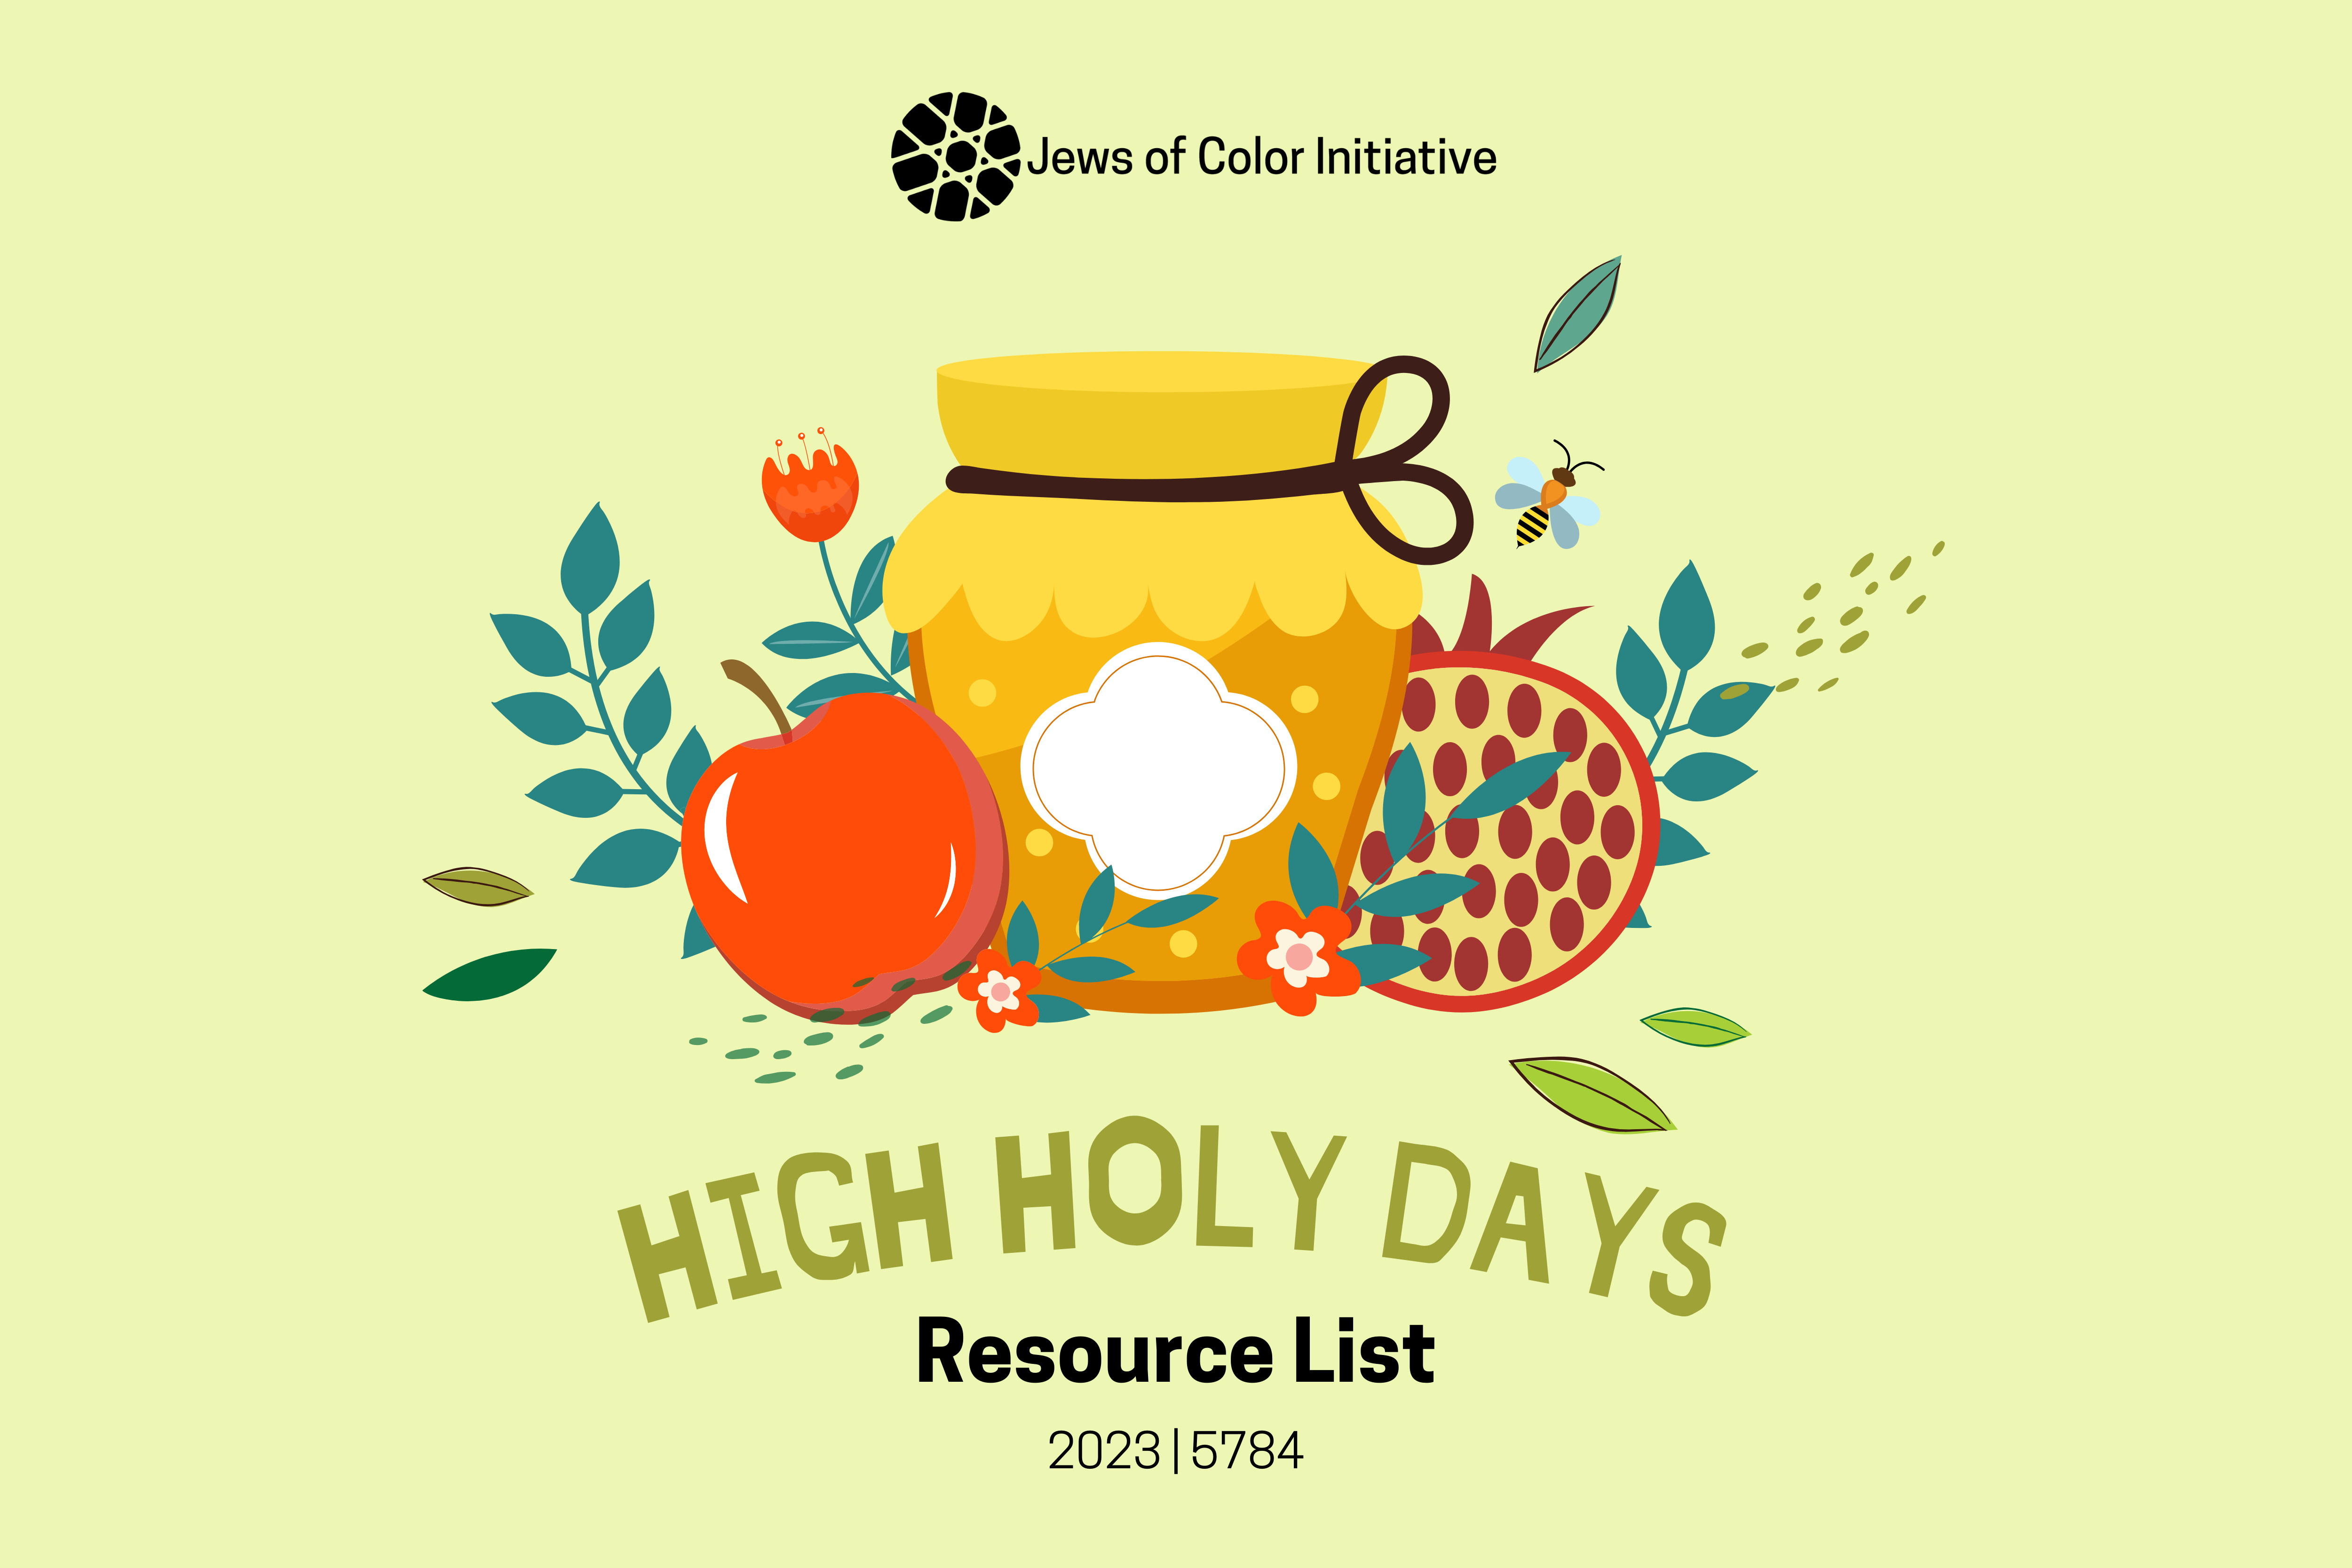 High Holy Days Resource List 2023 / 5784; Image shows a jar of honey, an apple, a pomegranate, leaves and small flowers, and a bee on a light green background